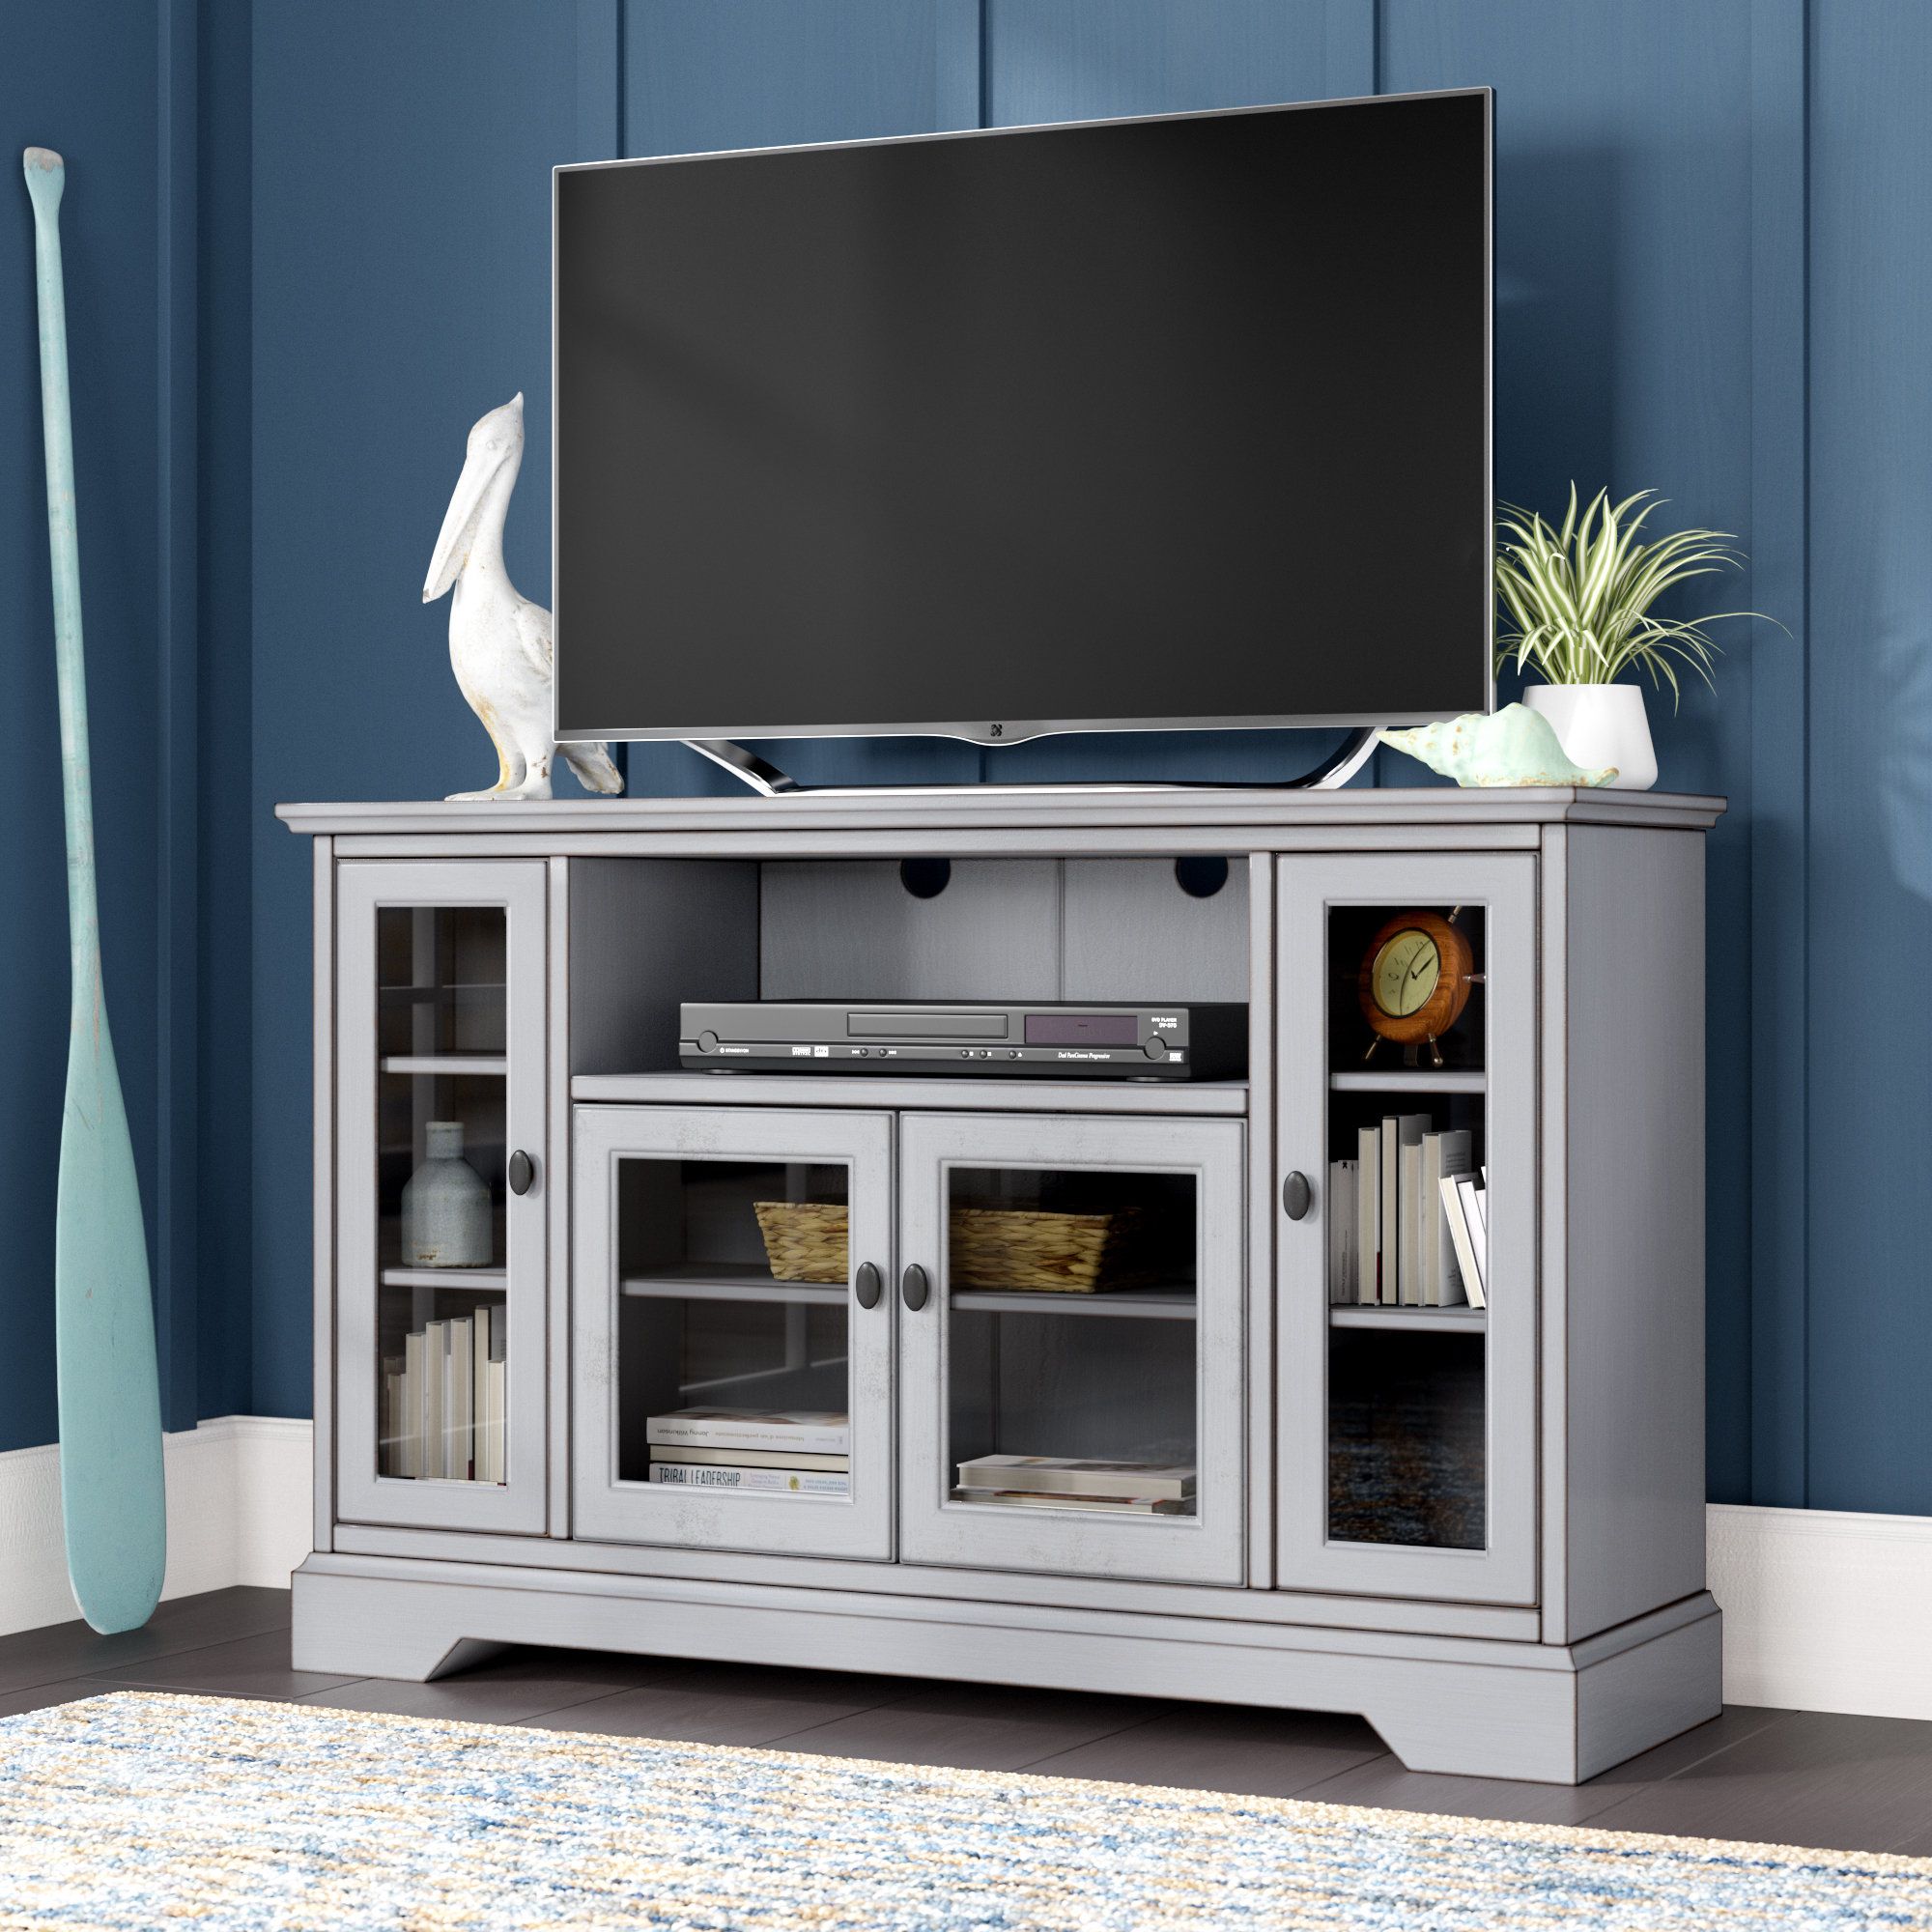 Beachcrest Home Josie Tv Stand For Tvs Up To 55" & Reviews | Wayfair Throughout Walton Grey 60 Inch Tv Stands (Photo 15 of 30)